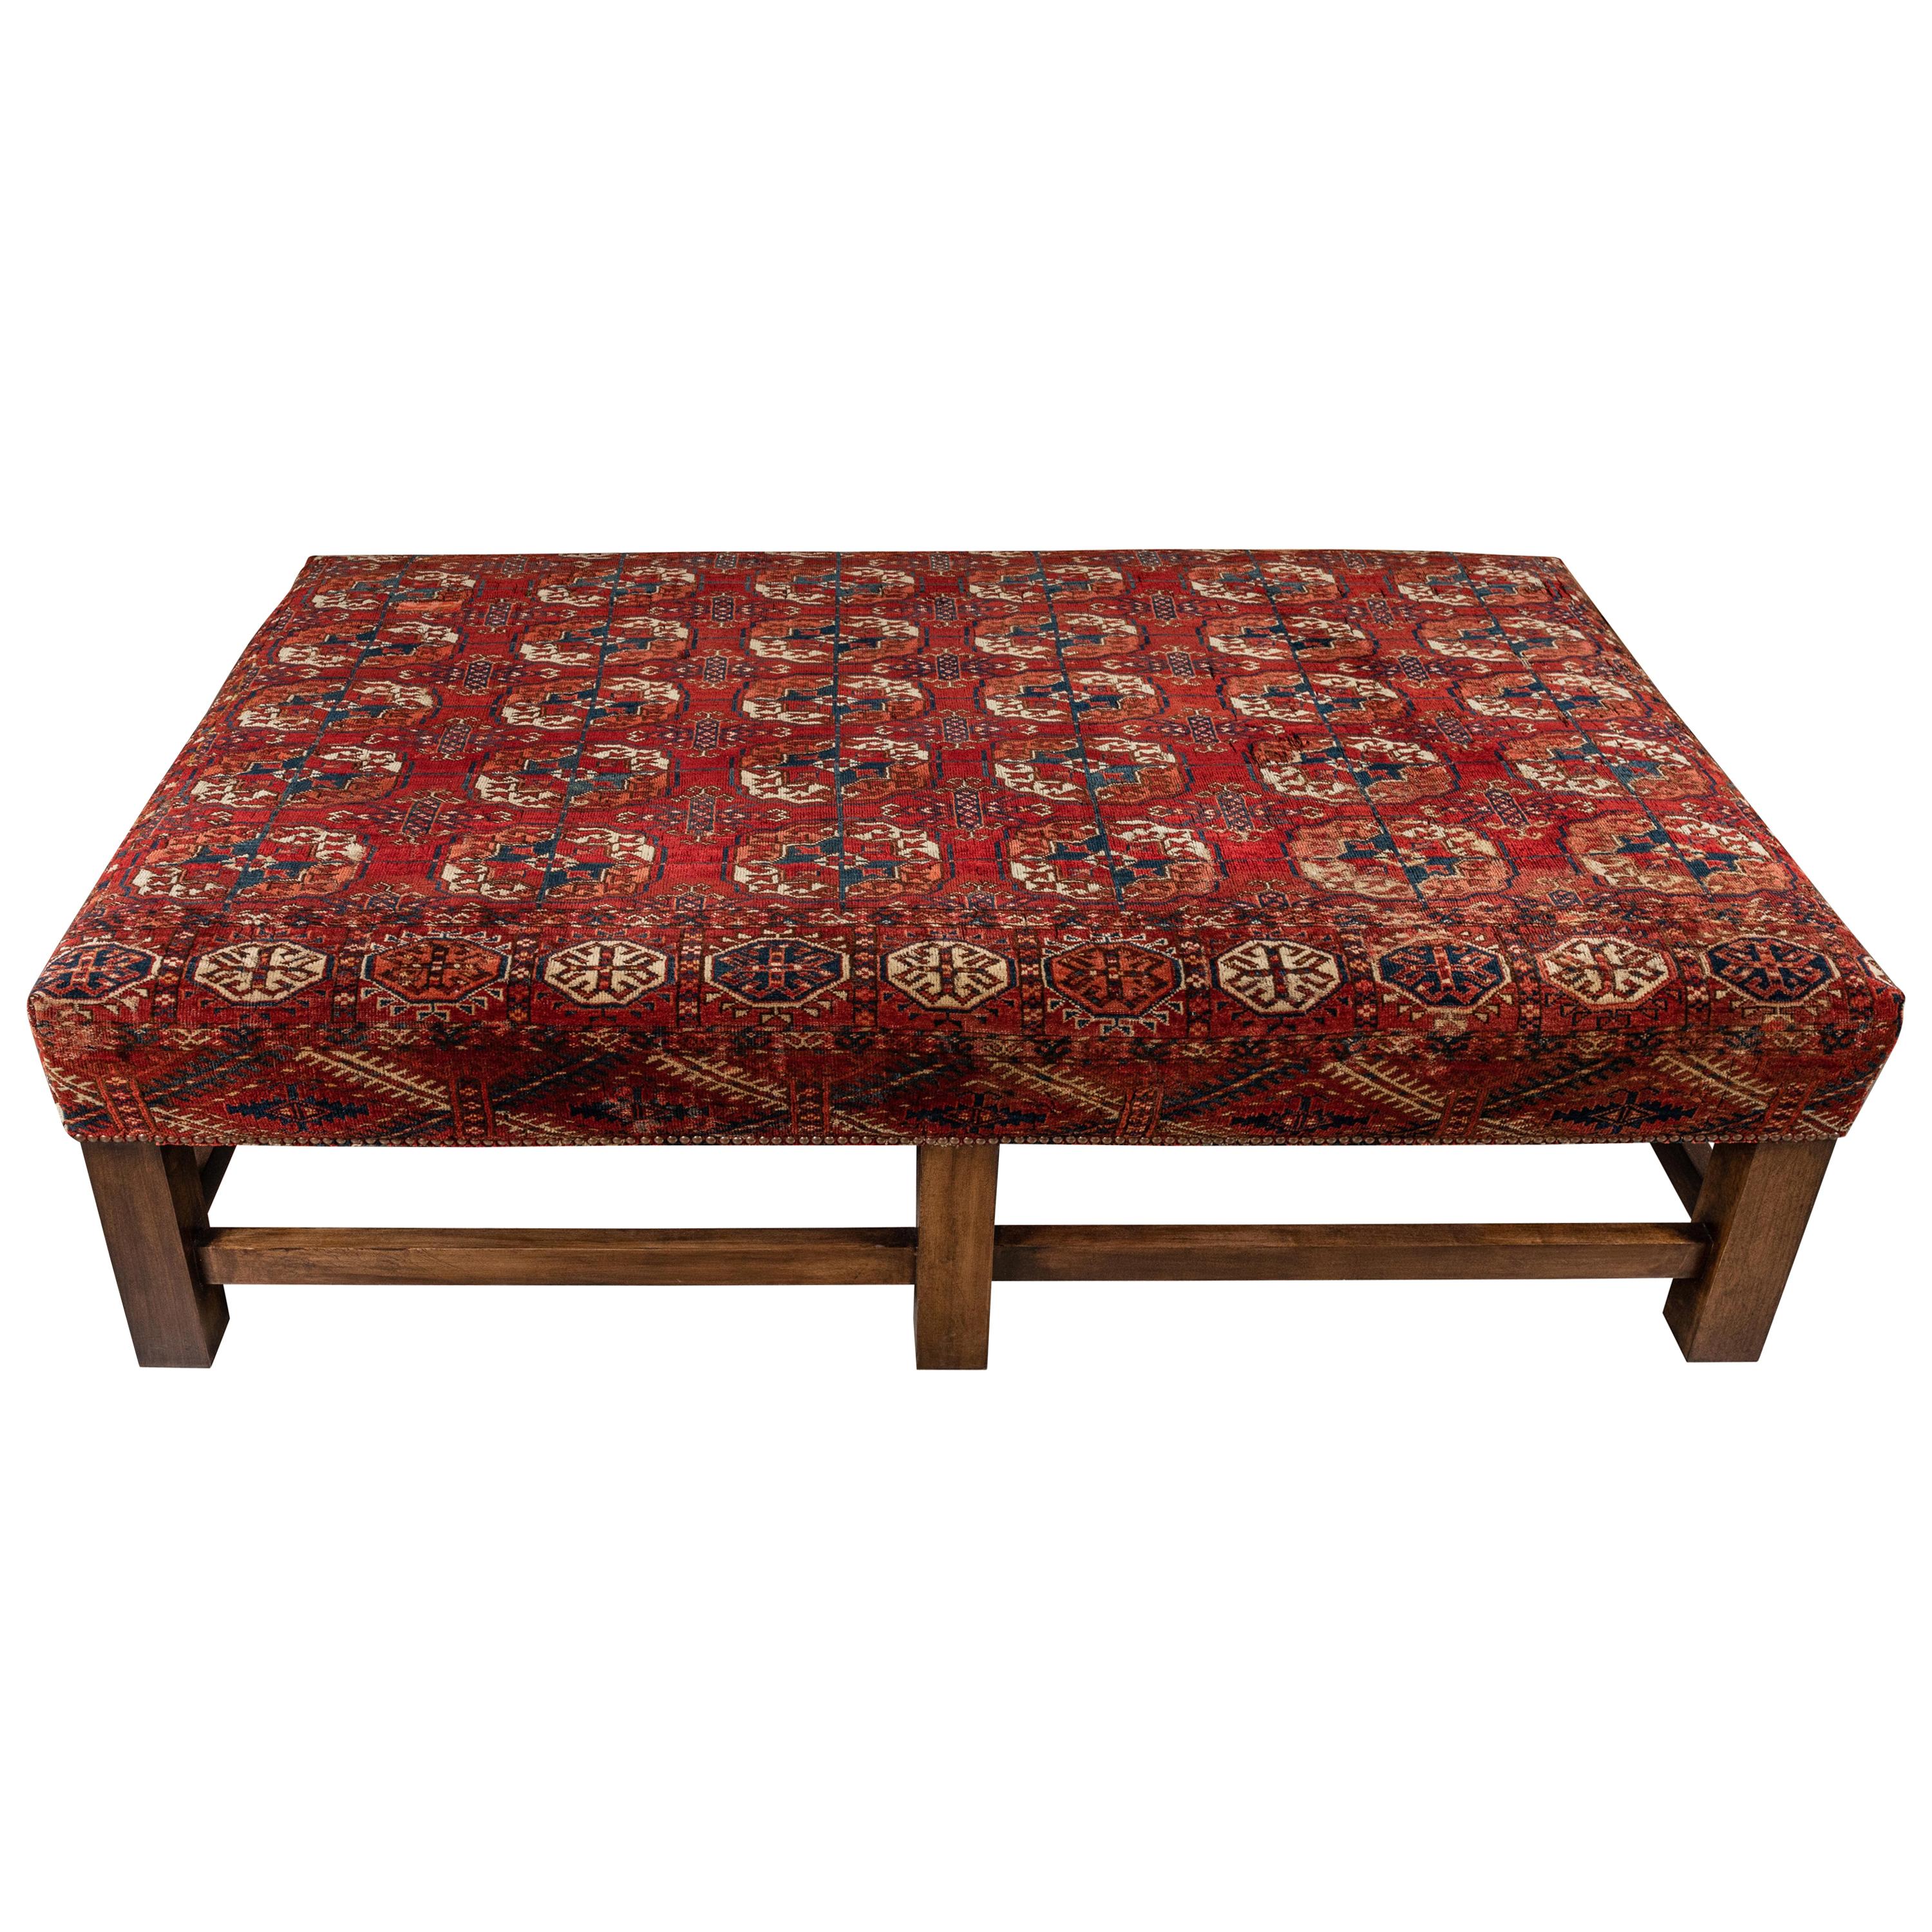 Large Scale Ottoman Upholstered with a Vintage Rug Textile